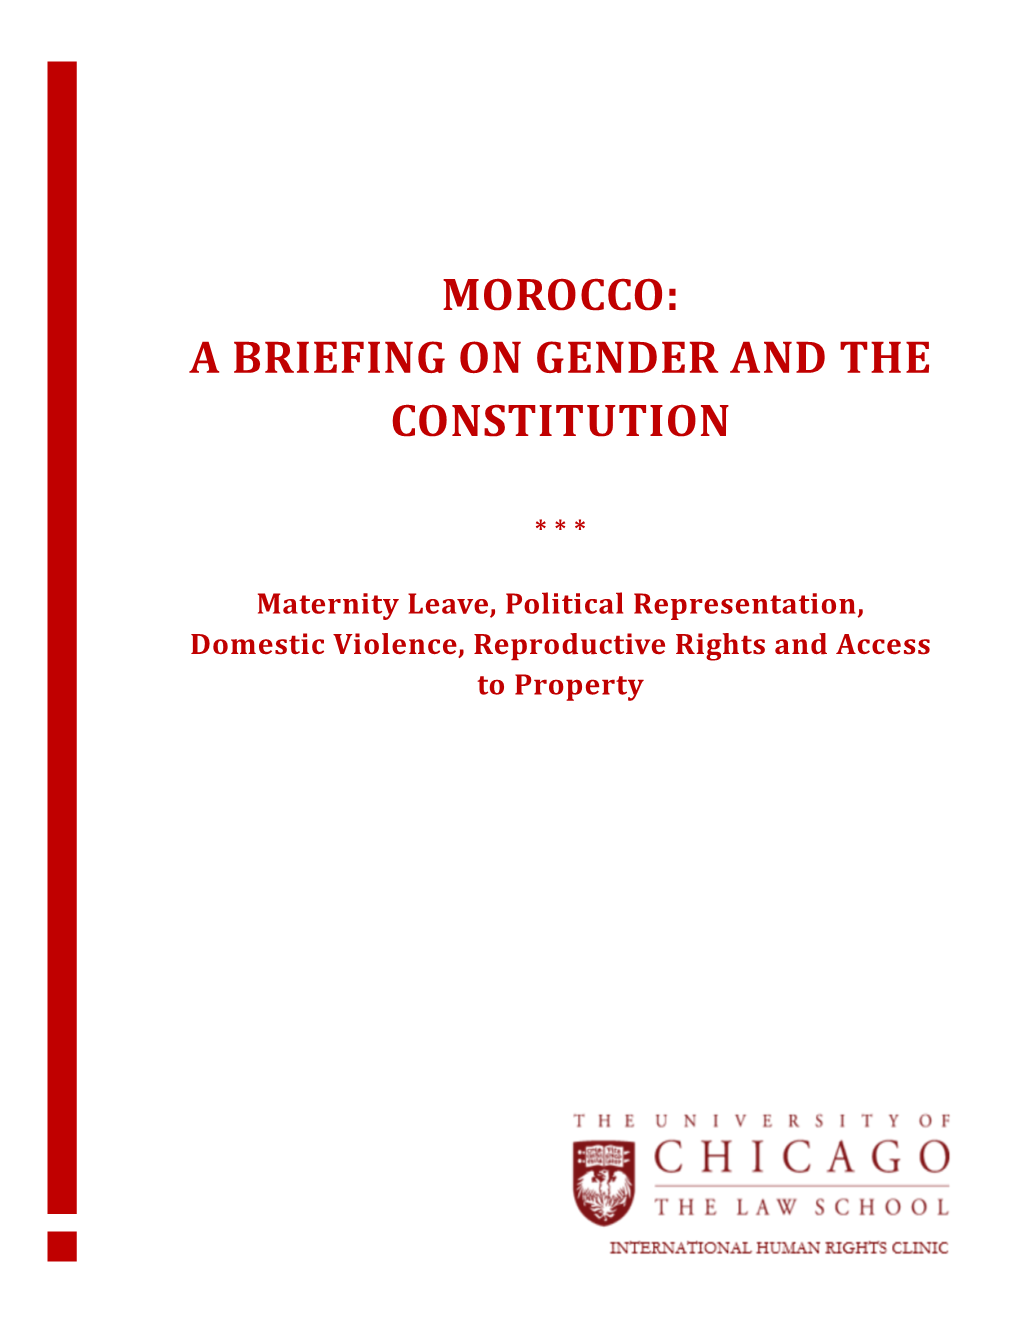 Morocco: a Briefing on Gender and the Constitution